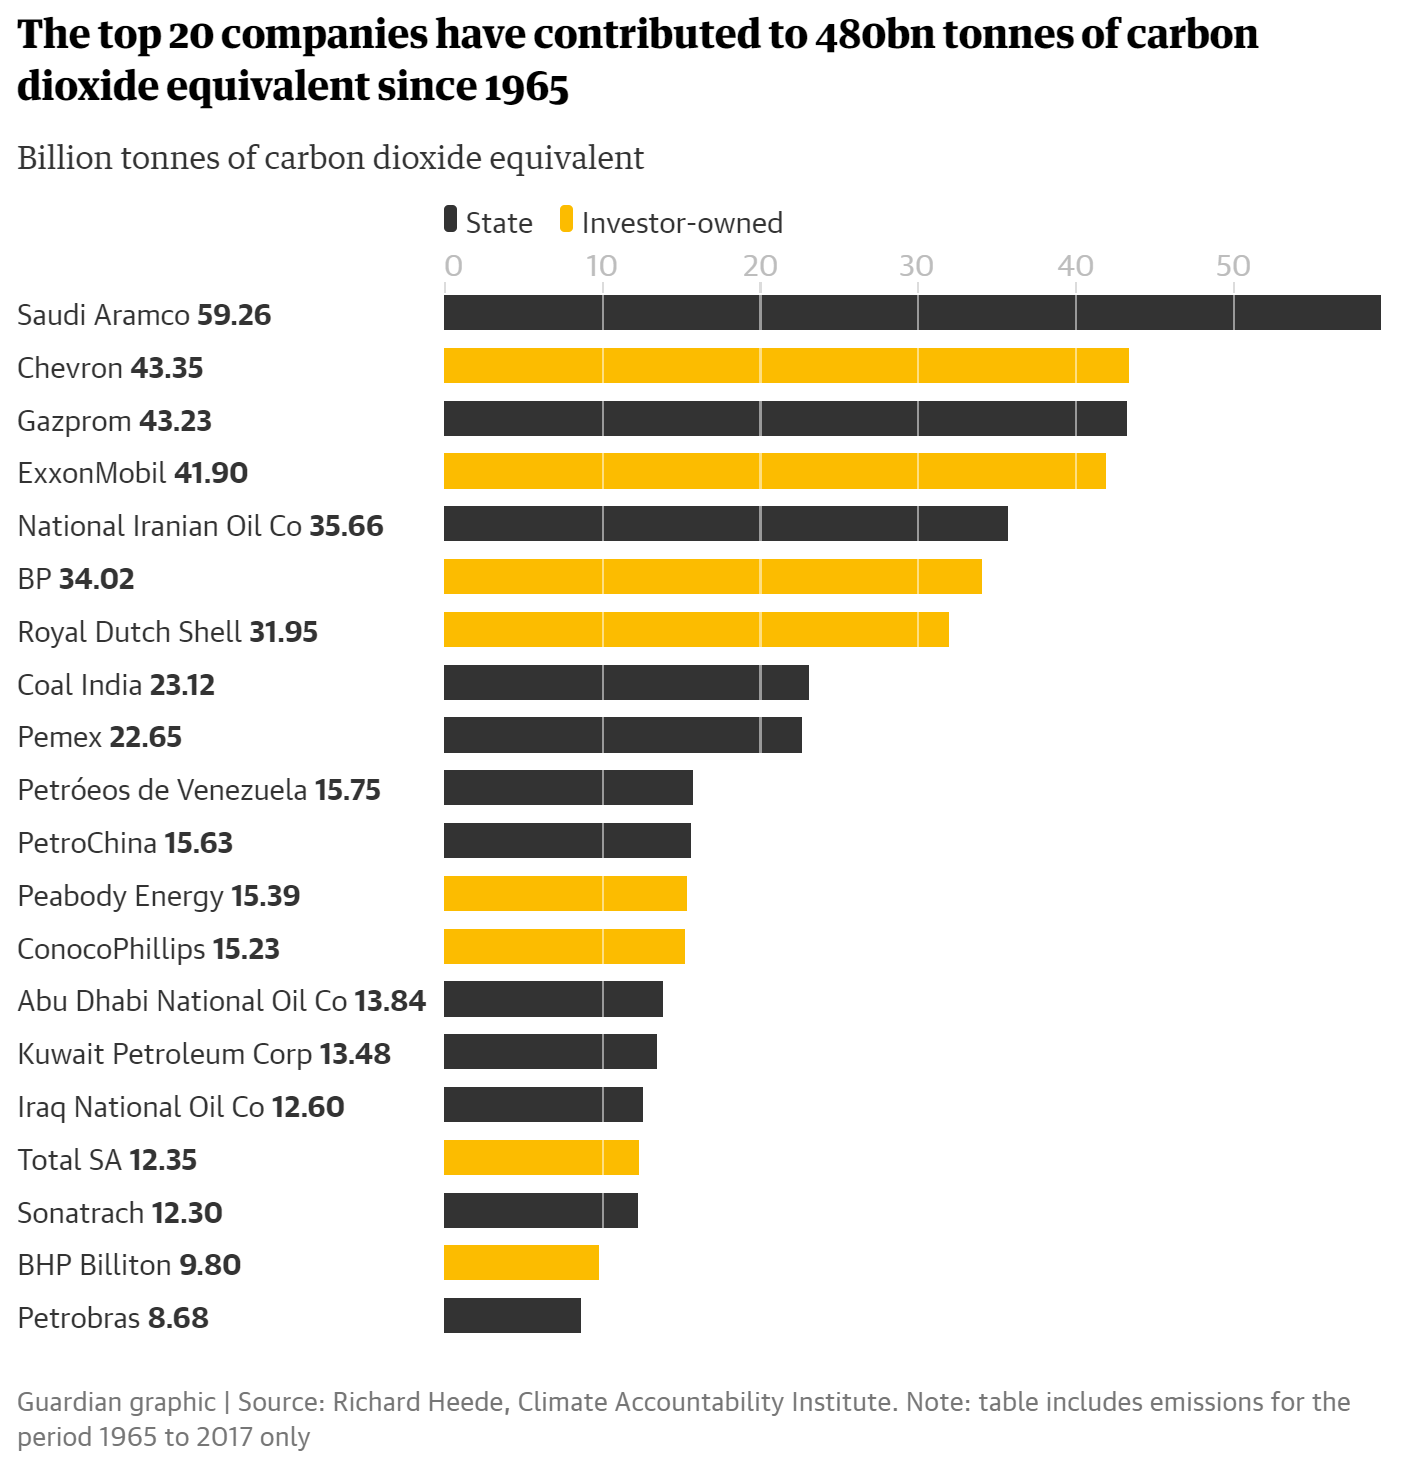 The top 20 companies that have contributed to 480 billion tonnes of carbon dioxide equivalent since 1965. At the top is Saudi Aramco, followed by Chevron, Gazprom, and Exxon Mobil. Data: Richard Heede / Climate Accountability Institute. Graphic: The Guardian